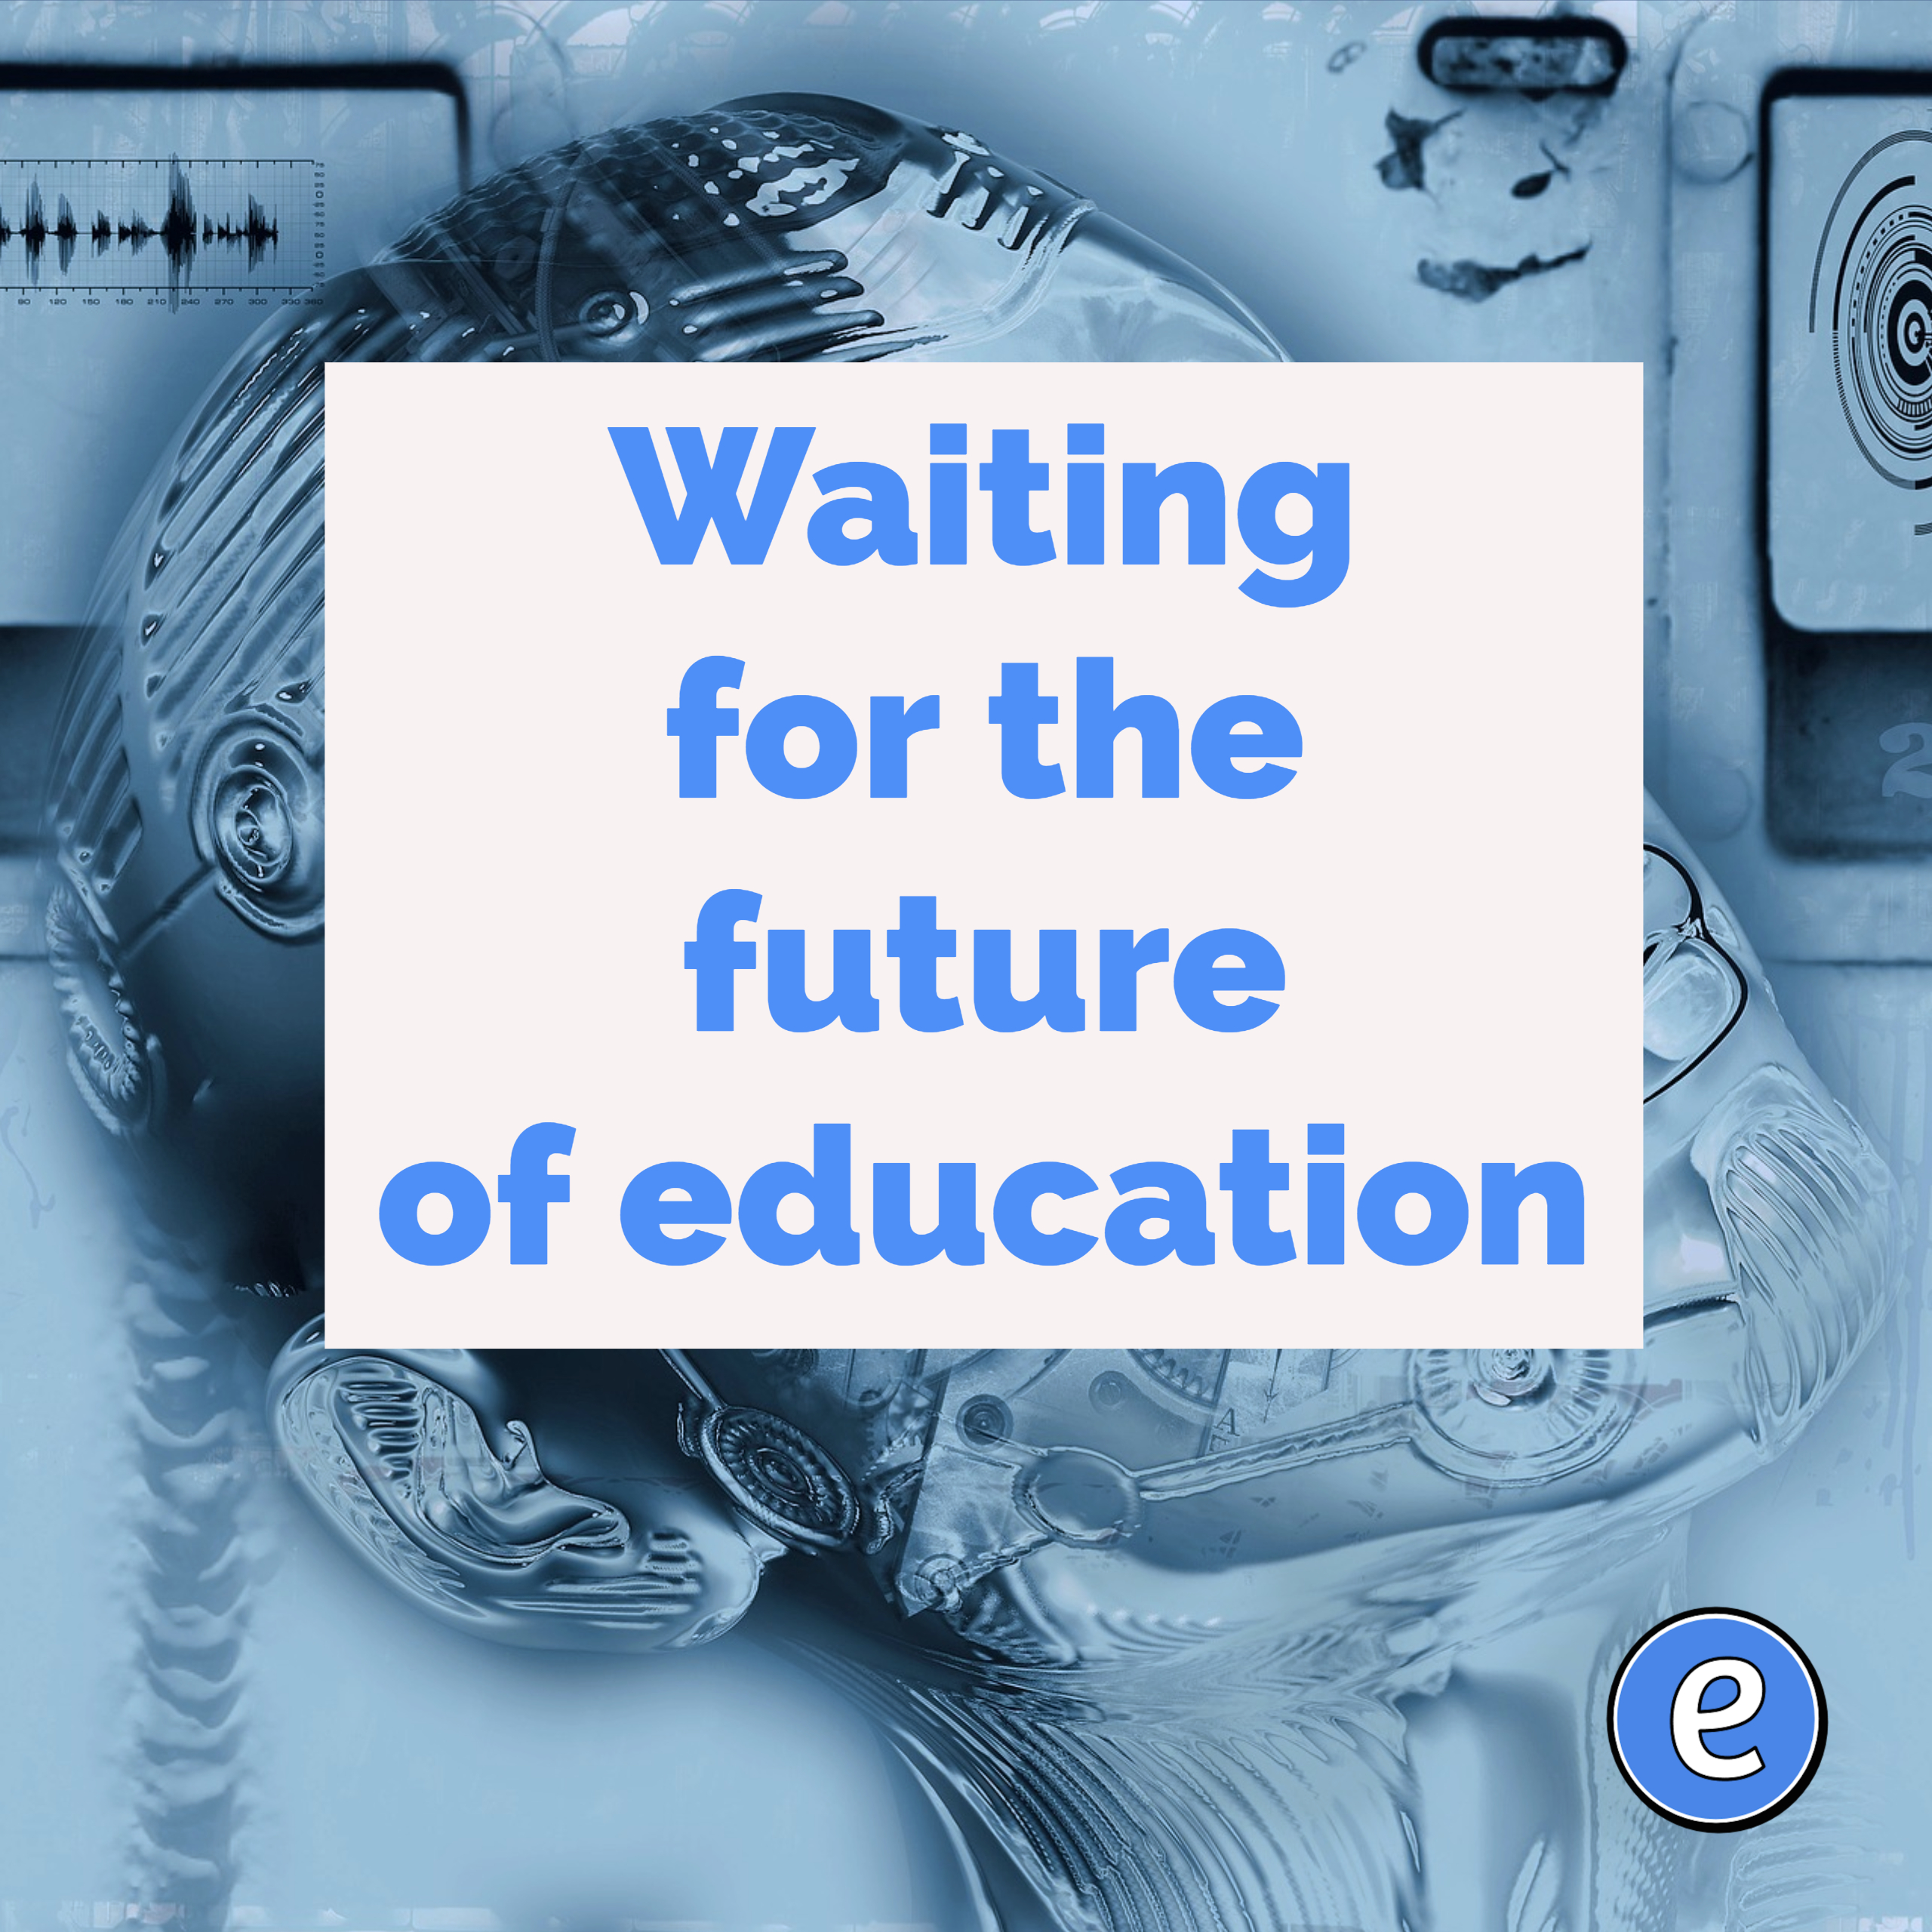 Waiting for the future of education